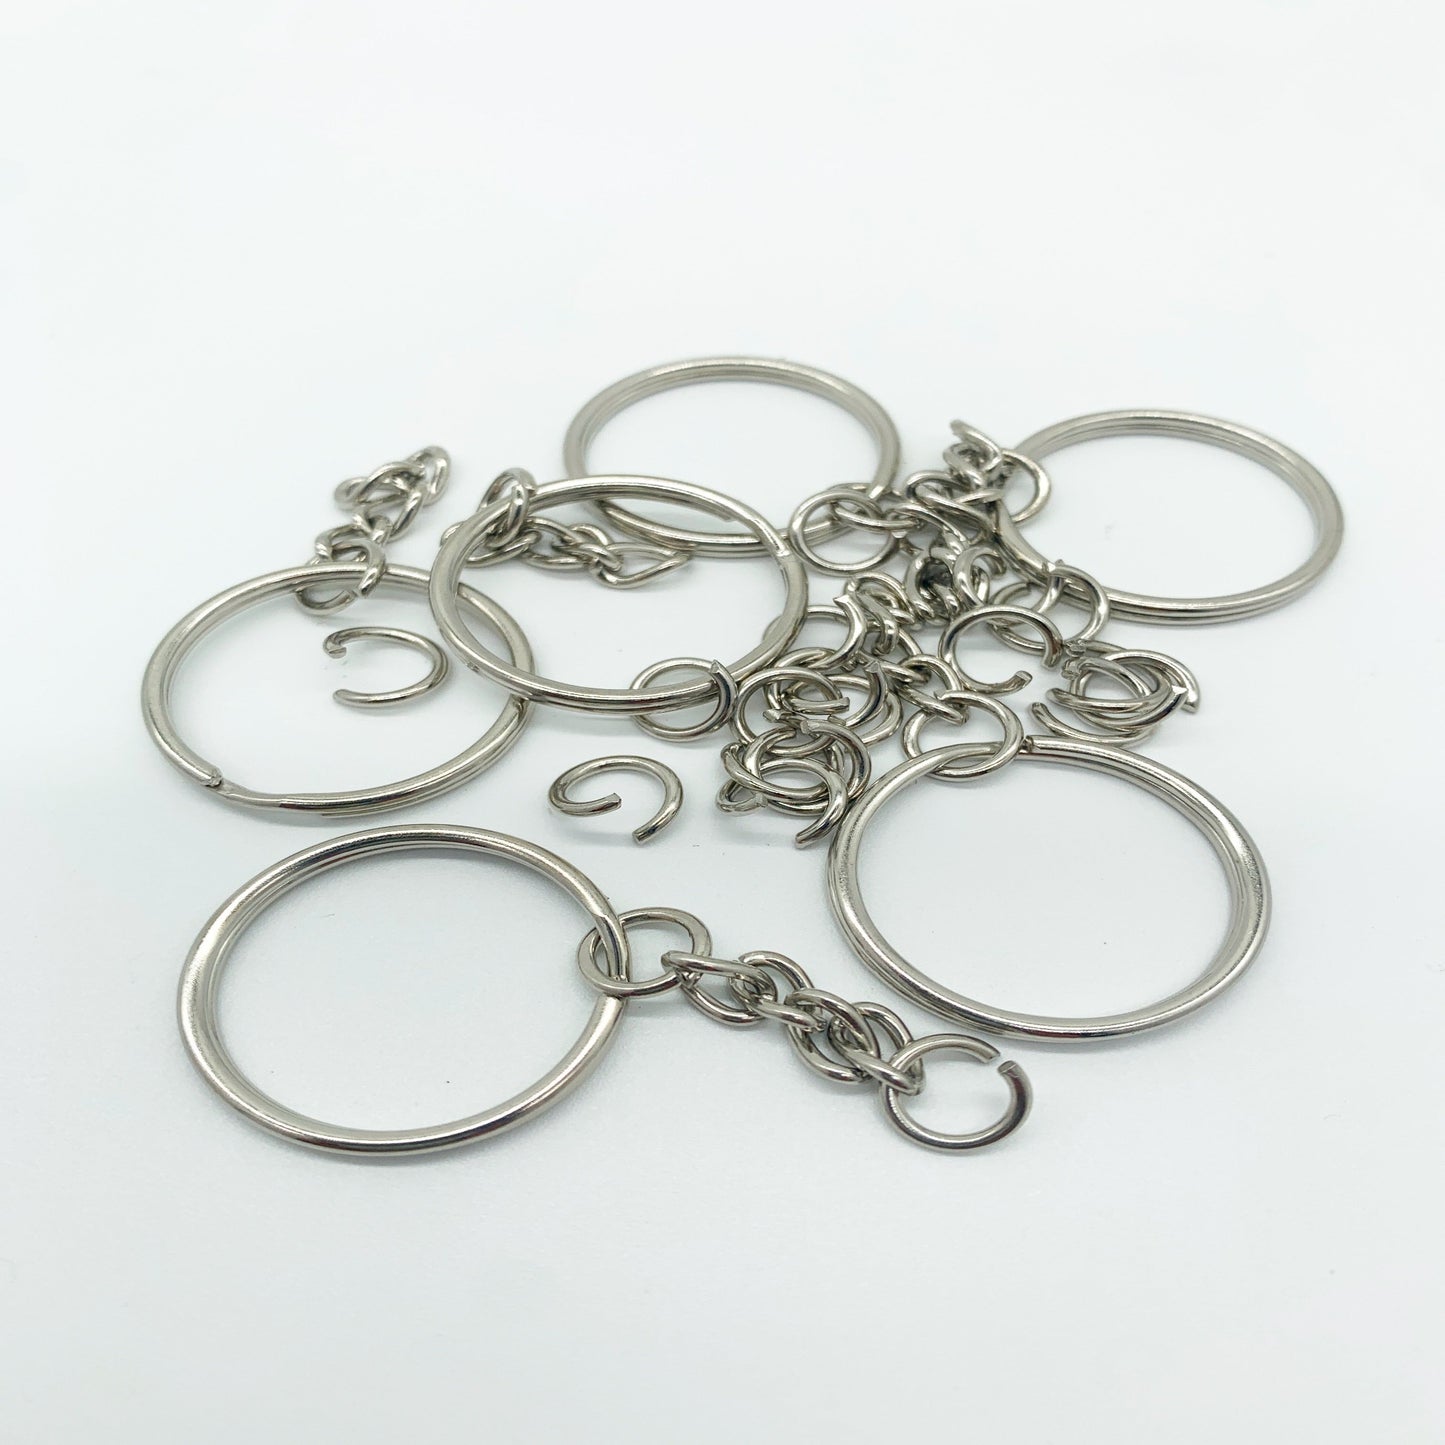 Keyrings for keychains in silver